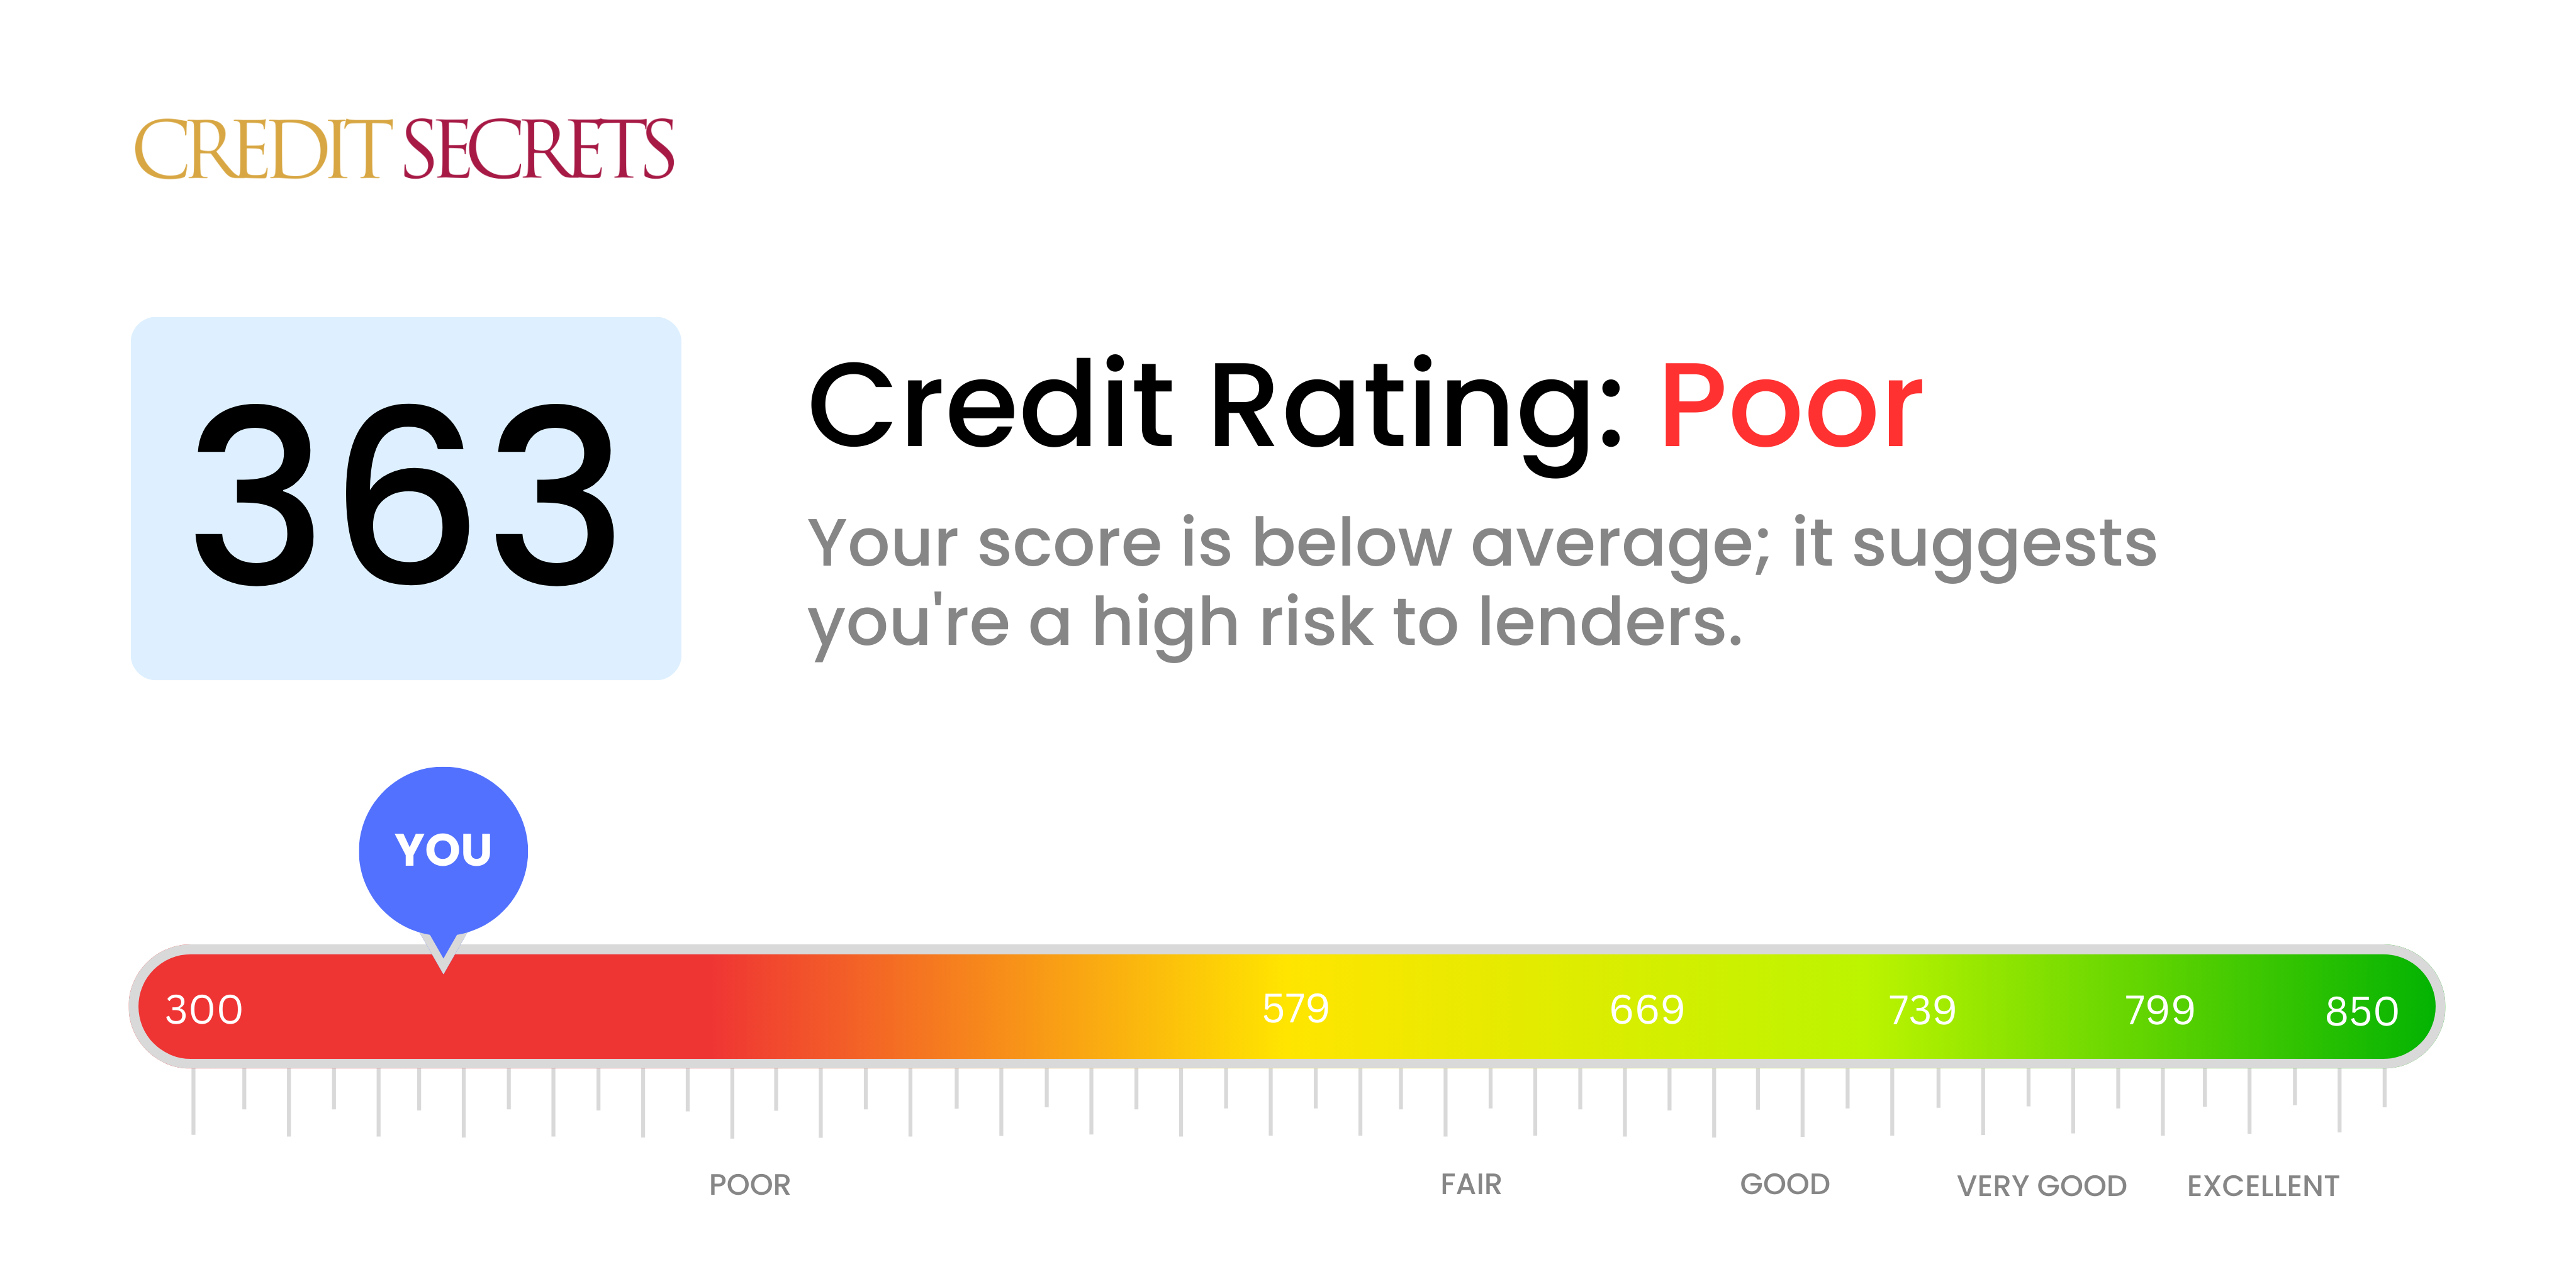 Is 363 a good credit score?